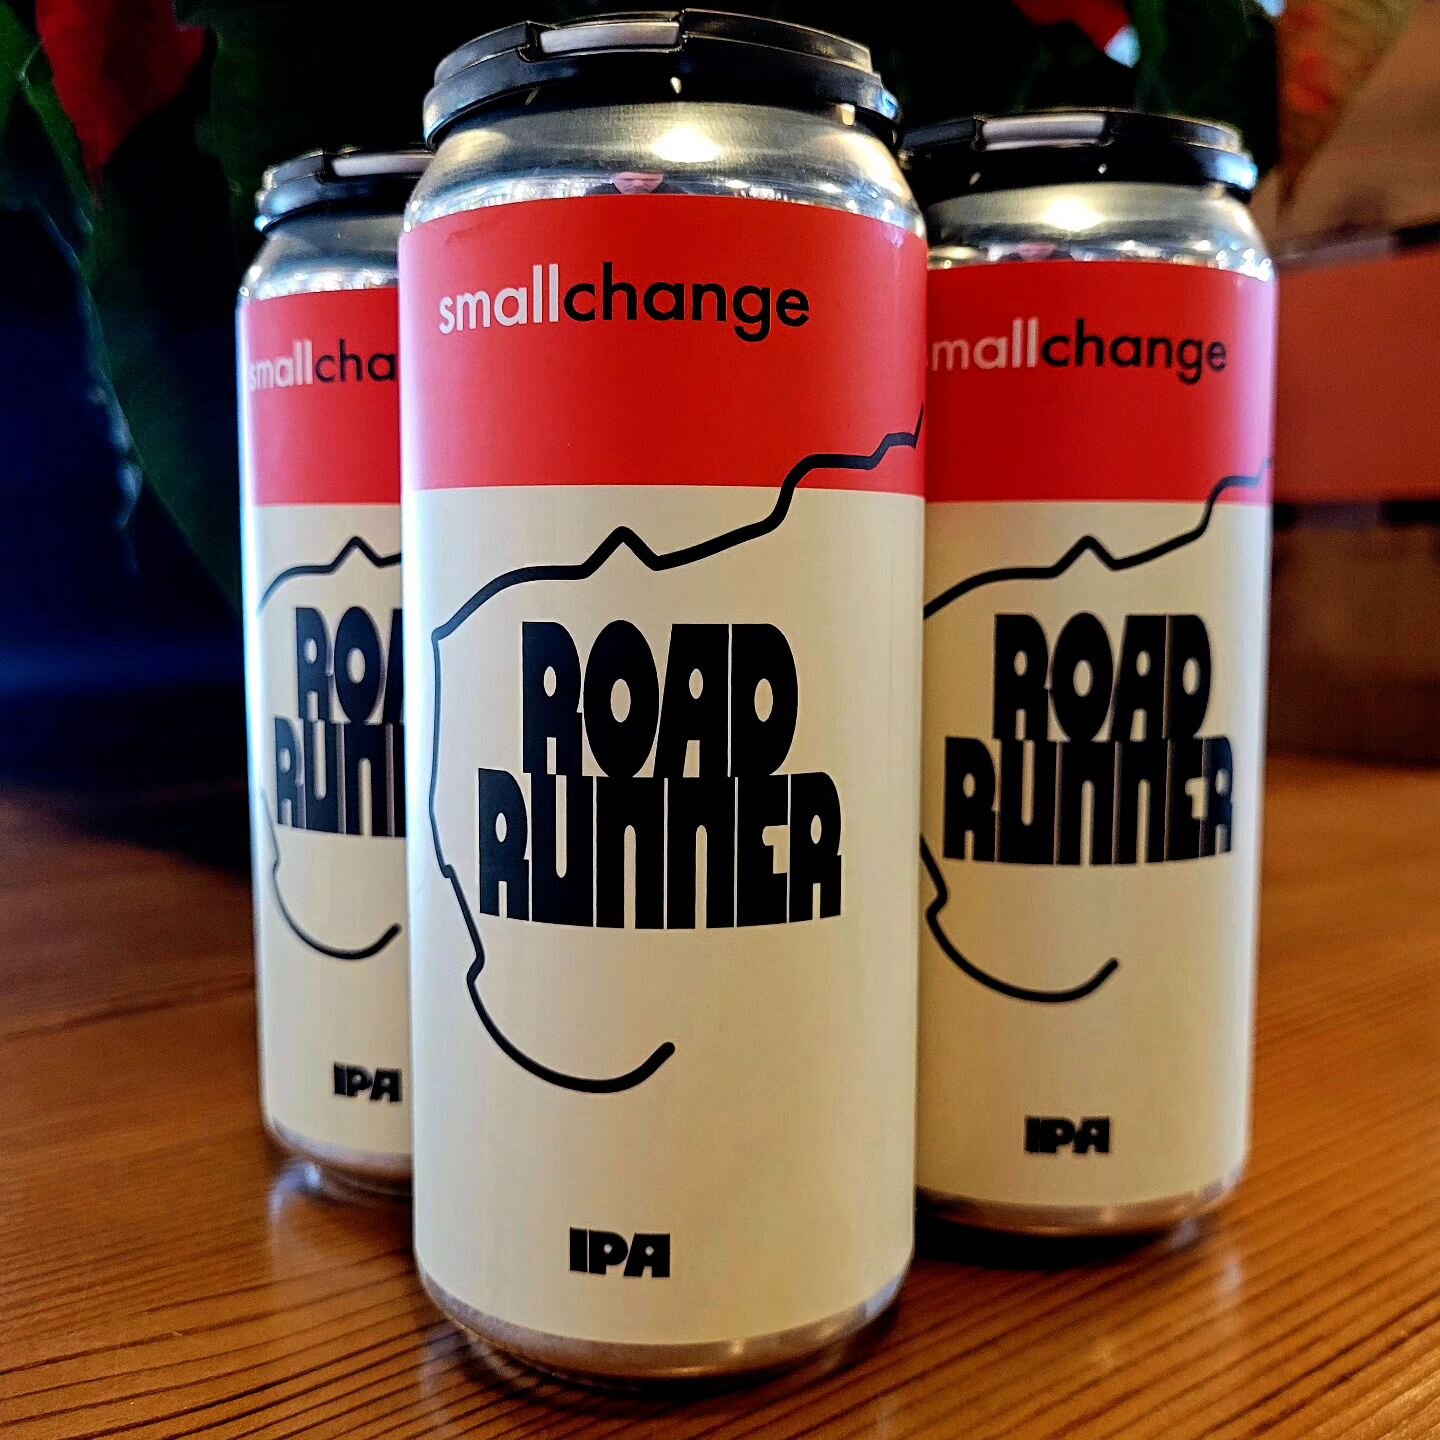 Have you tried Roadrunner yet? Our new IPA is easy-drinking and delicious! Available now at the best craft beer stores and in select bars and restaurants!